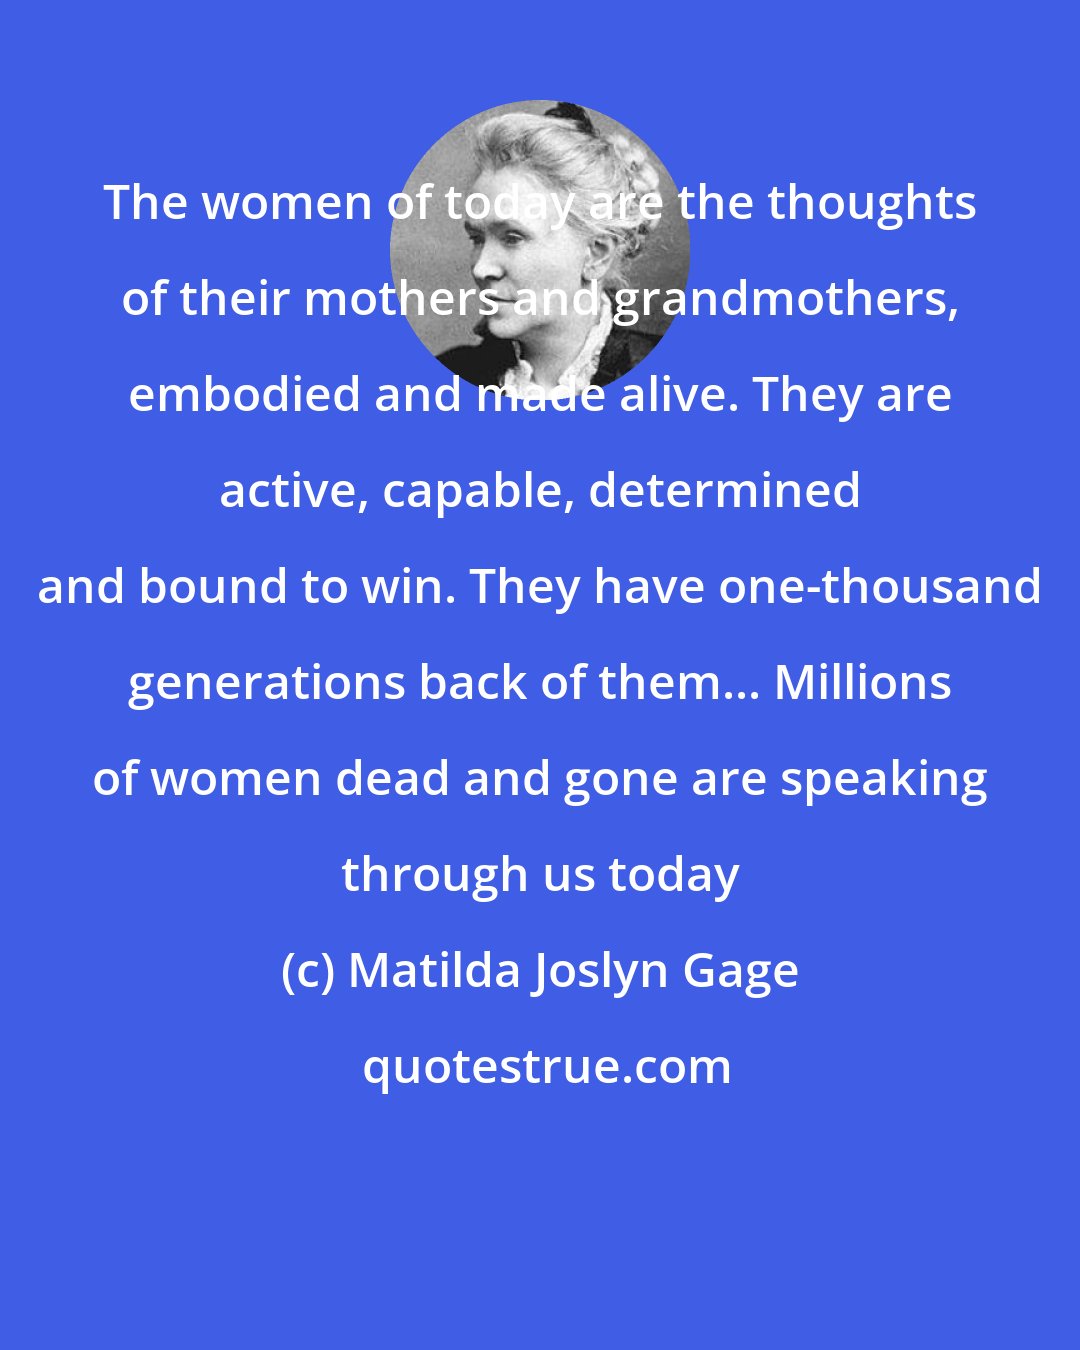 Matilda Joslyn Gage: The women of today are the thoughts of their mothers and grandmothers, embodied and made alive. They are active, capable, determined and bound to win. They have one-thousand generations back of them... Millions of women dead and gone are speaking through us today